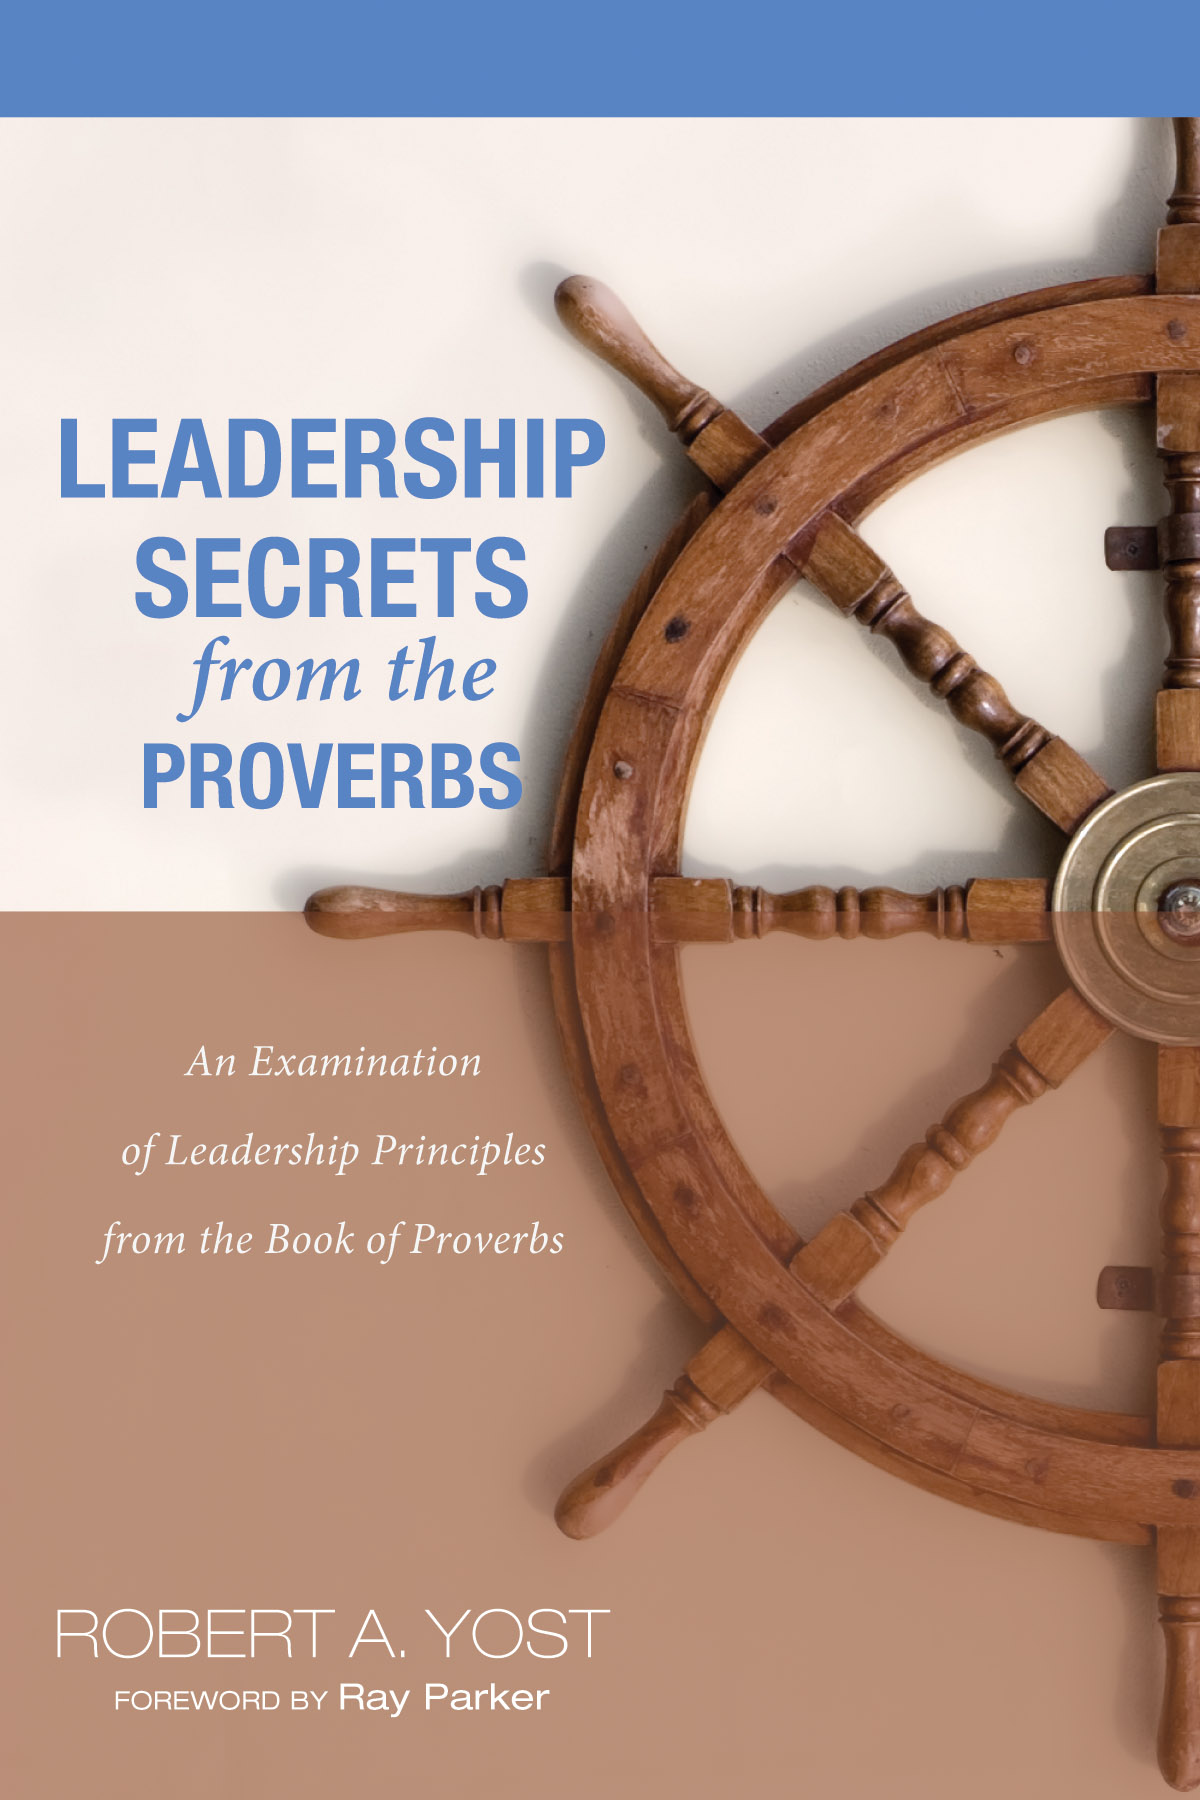 Leadership Secrets from the Proverbs: An Examination of Leadership Principles from the Book of Proverbs